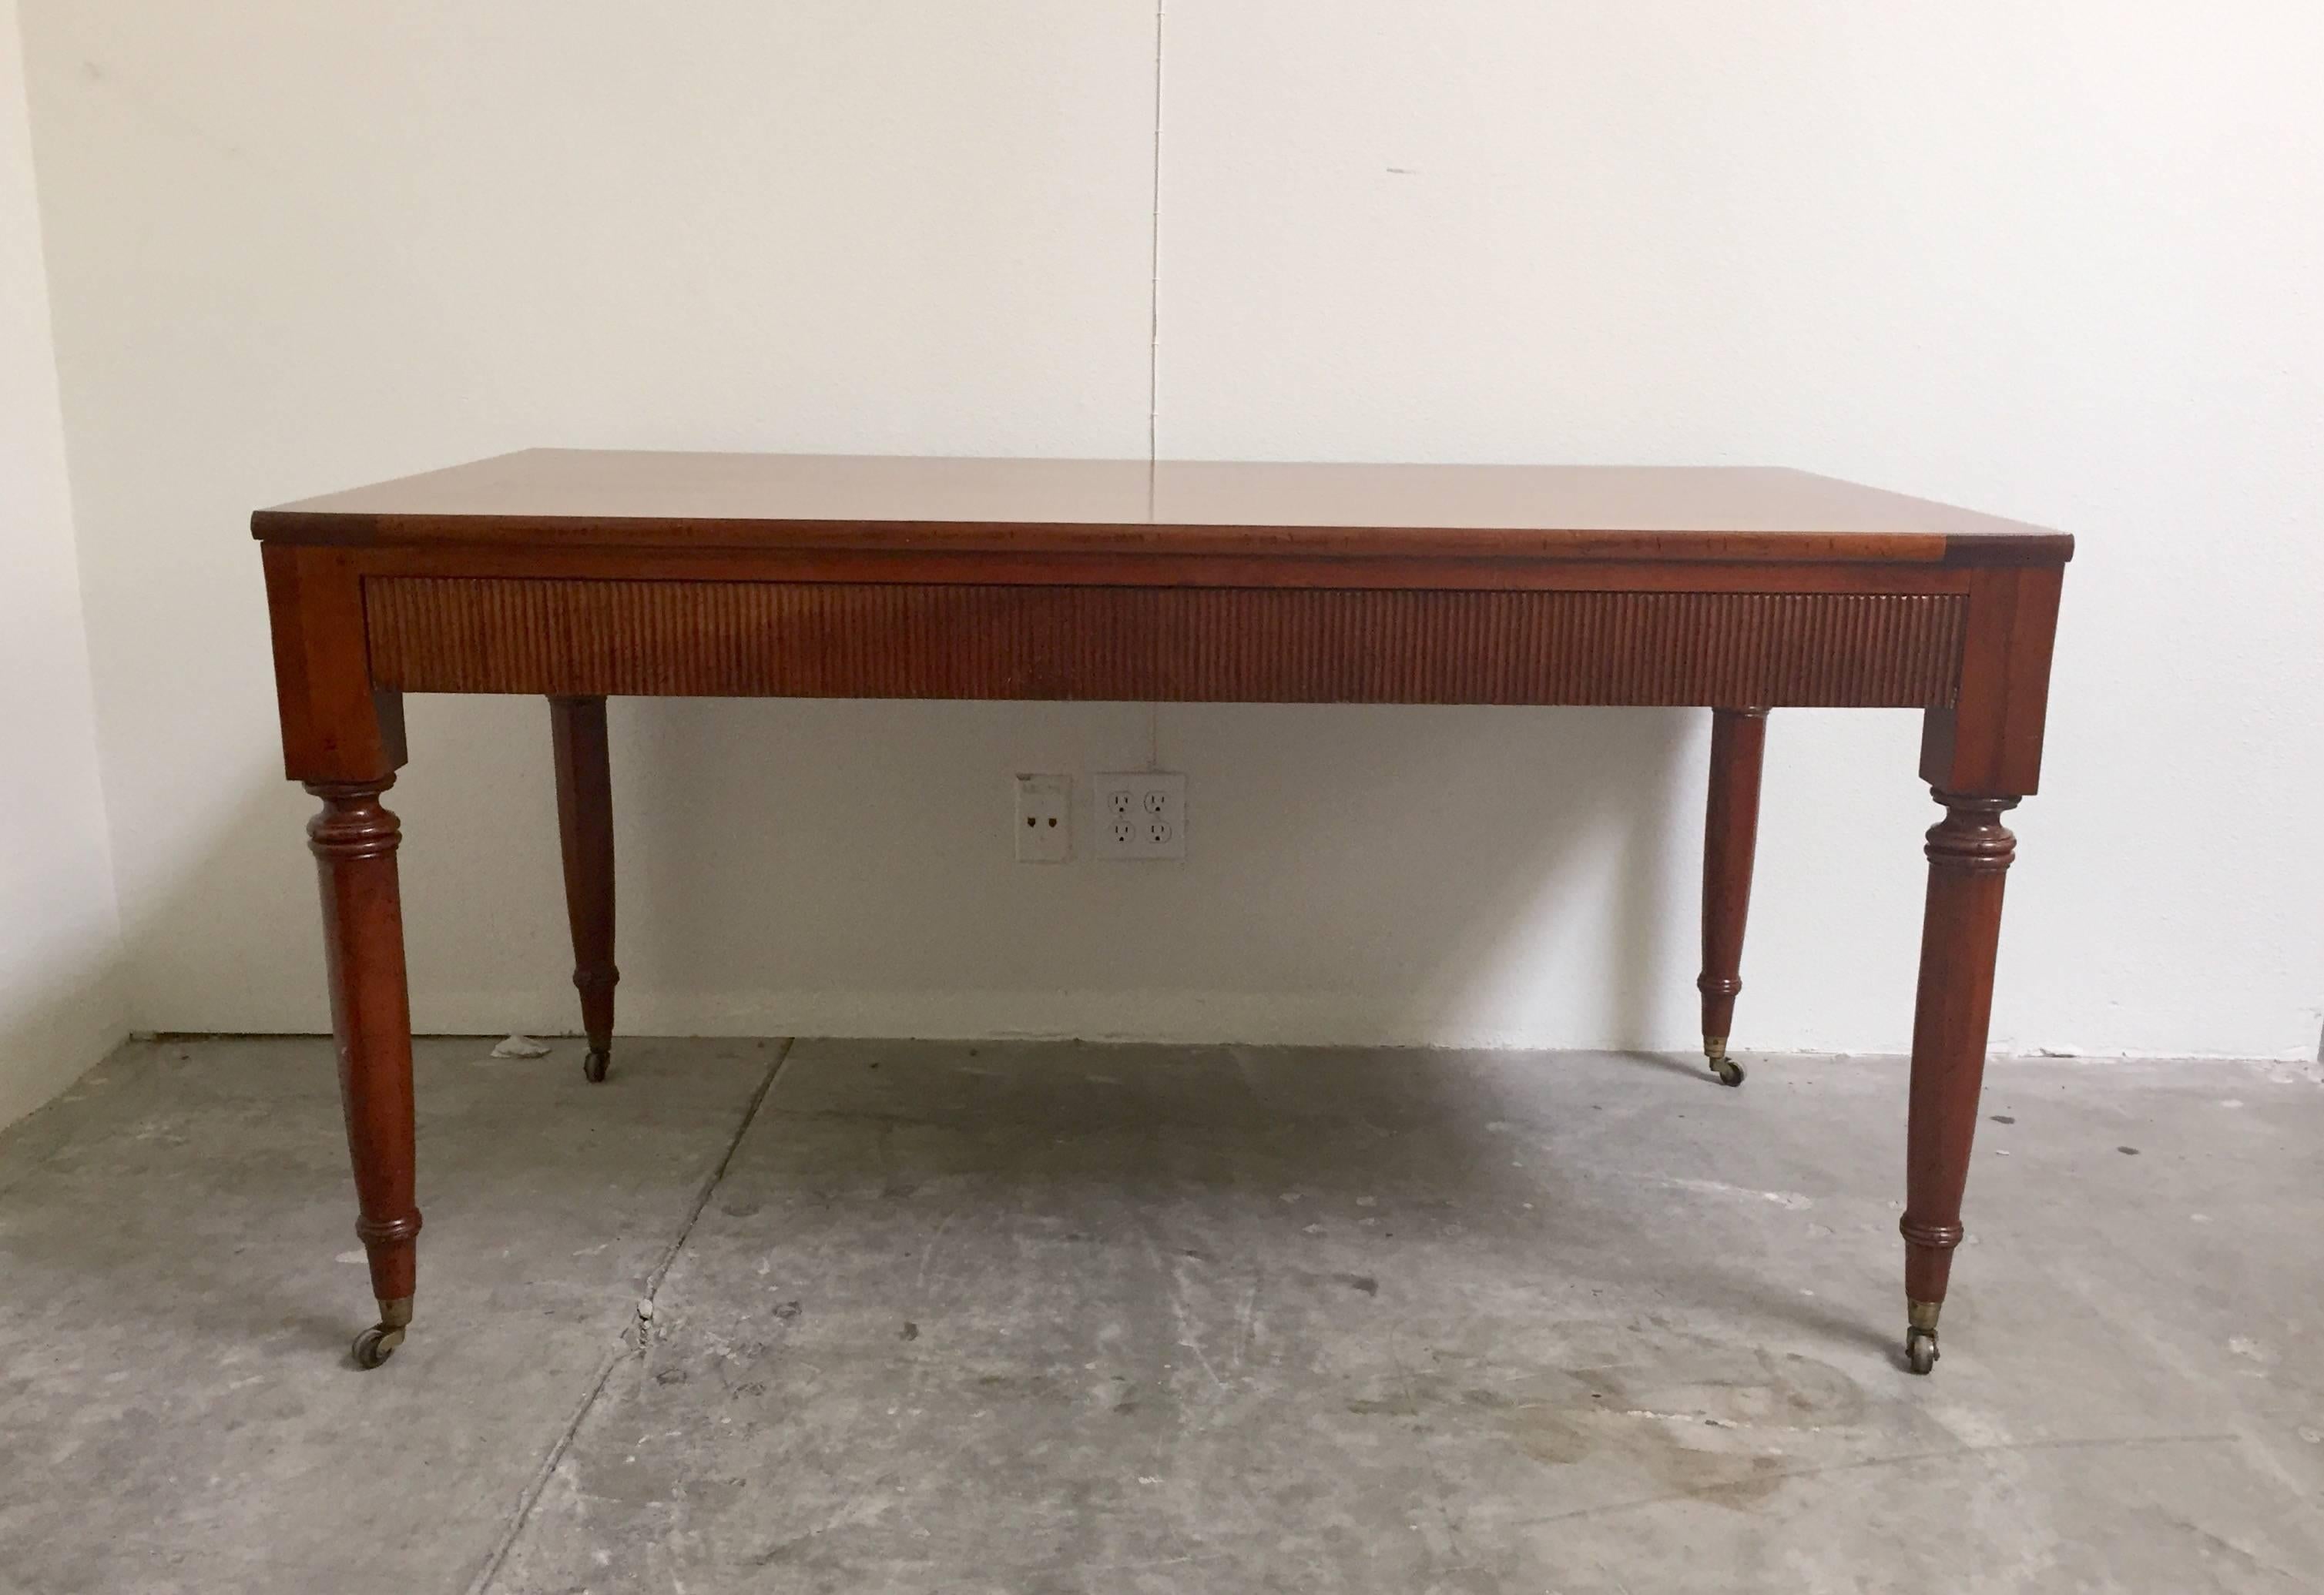 Regency style milling road by baker floating desk. Oversized drawer on one side, brass casters and detailing around the edges and on the legs. Makers mark on the left side of the drawer.